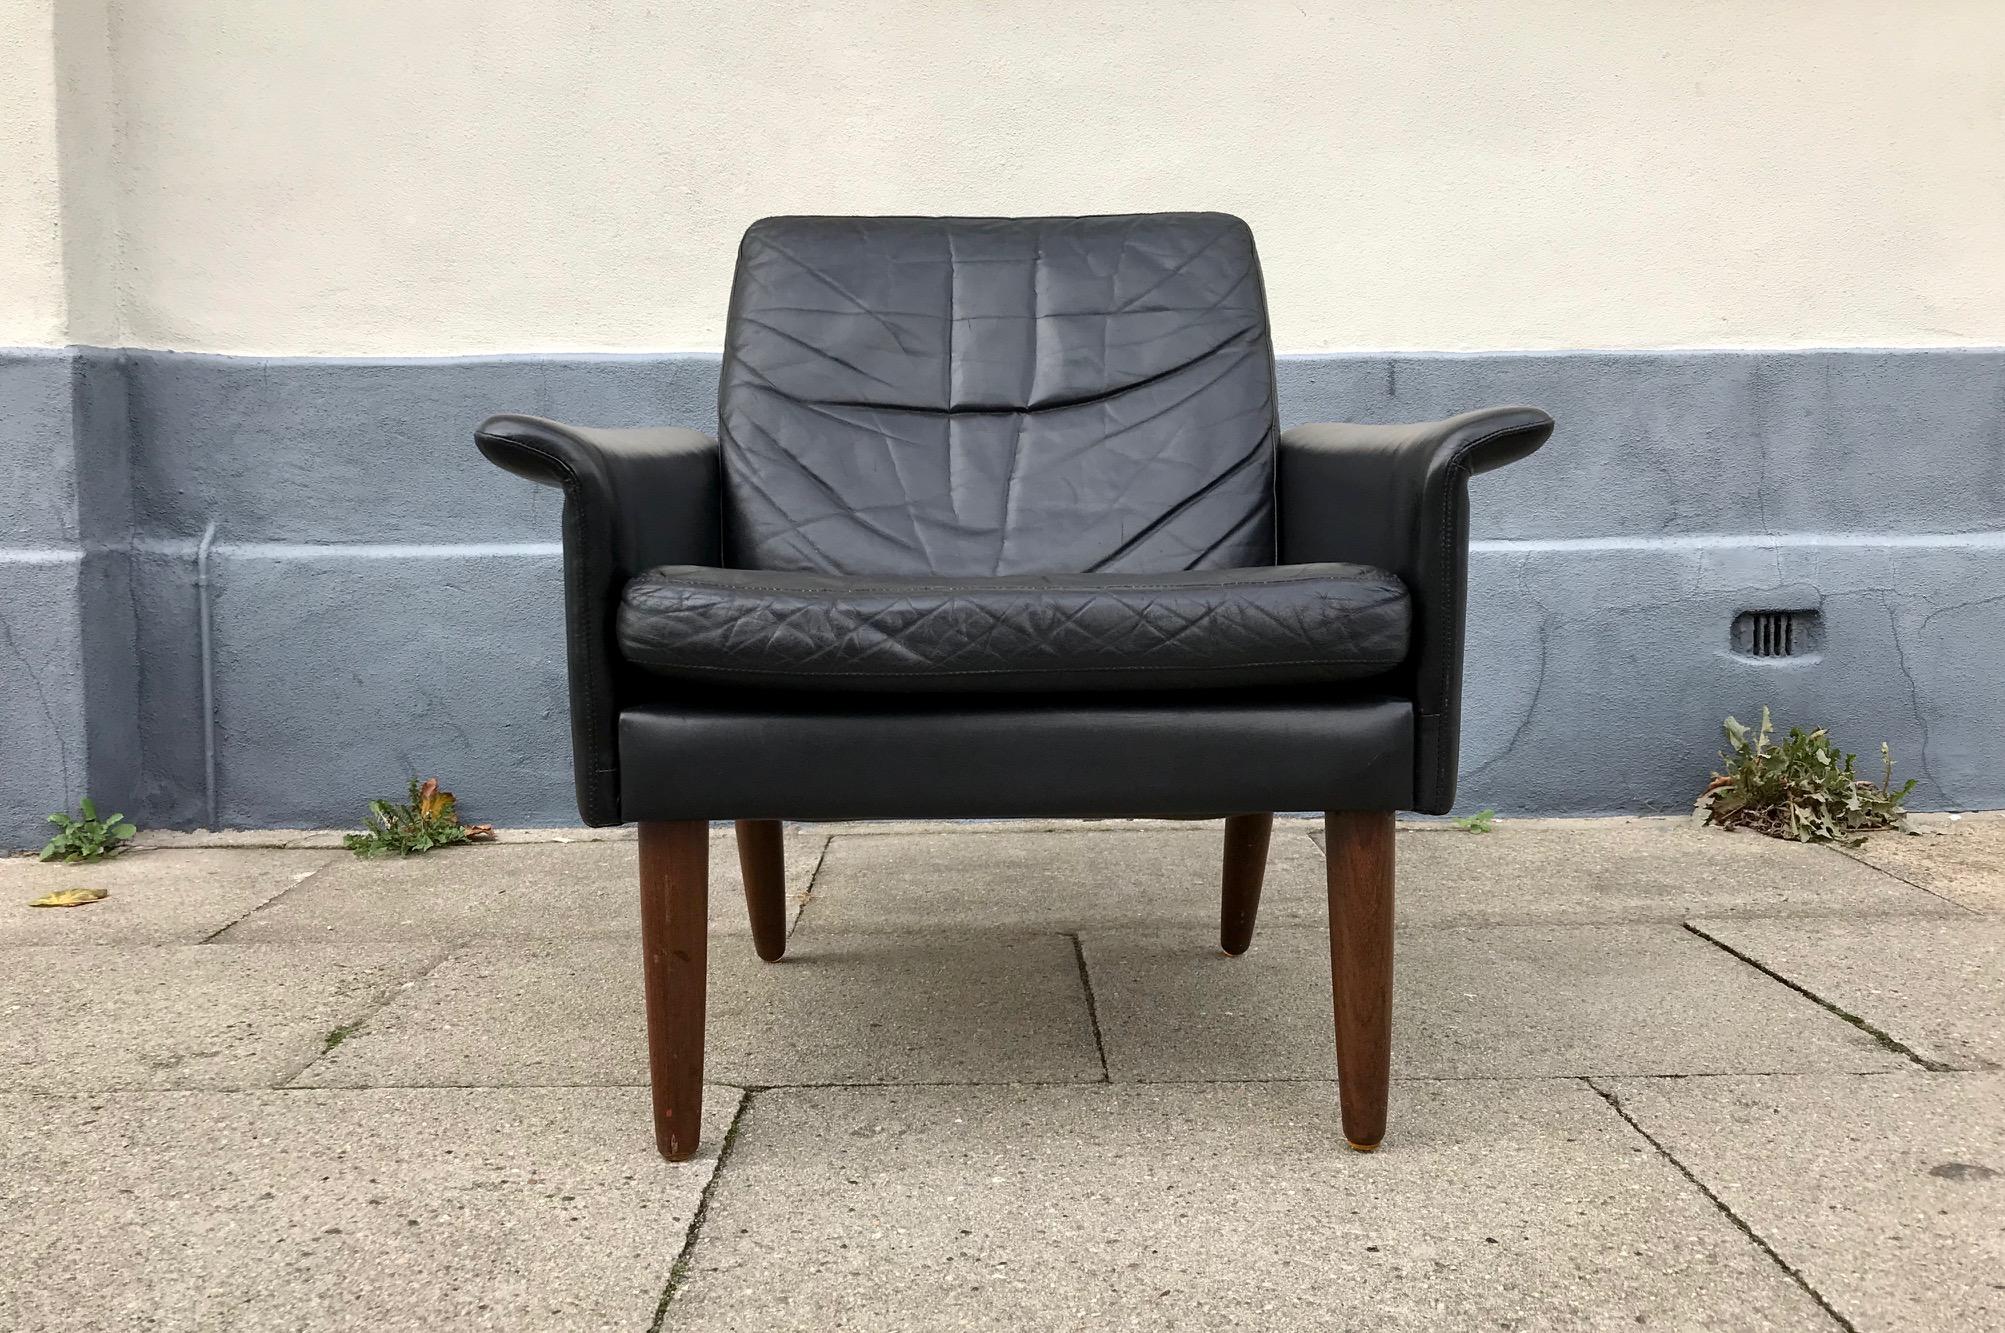 All original Hans Olsen lounge chair designed during the early 1960s and manufactured at CS Moebler in Denmark. This example is upholstered in its original soft black leather and has tapered legs in solid teak.